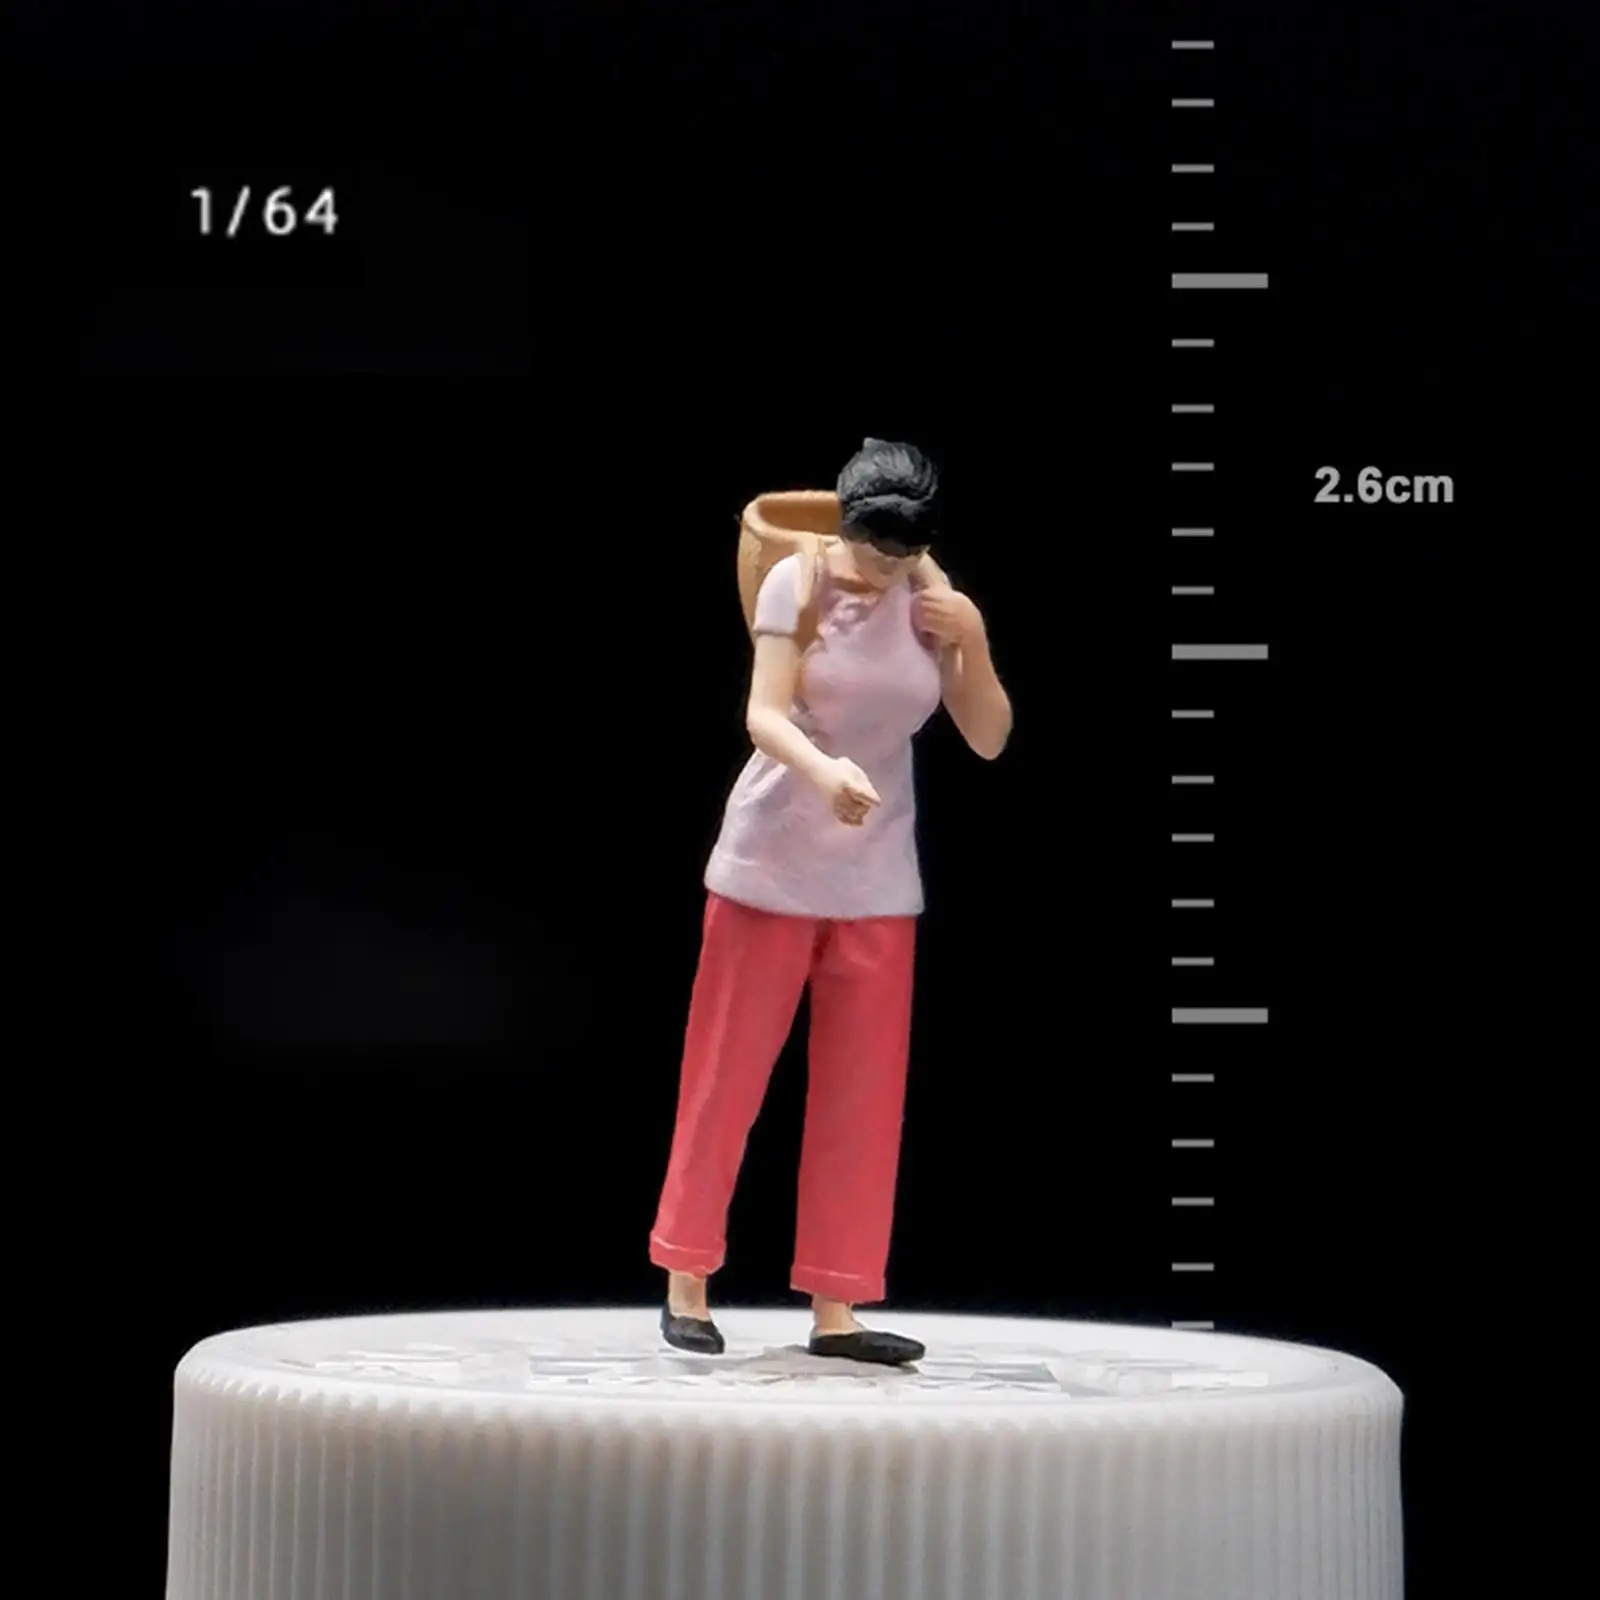 1/64 Scale People Figures Crafts Miniature People Figurines for Micro Landscapes Diorama Photography Props Layout Accessories